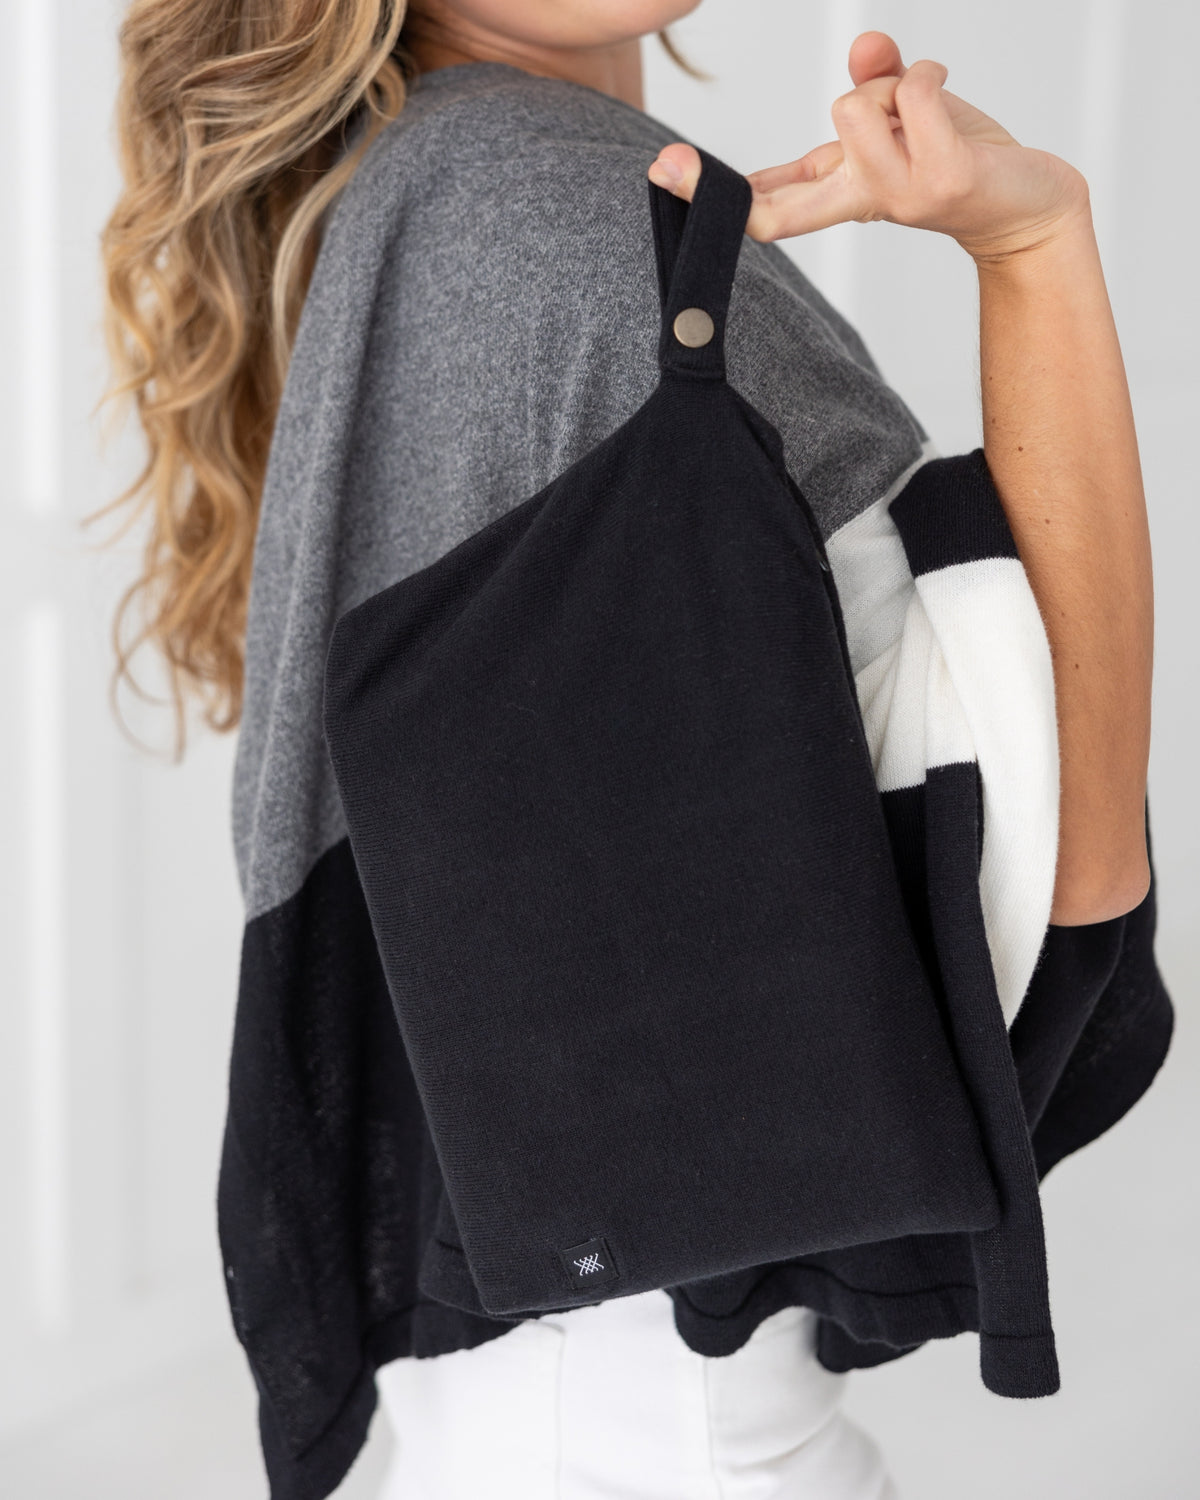 The Dreamsoft Travel Scarf Carry Pouch - Black